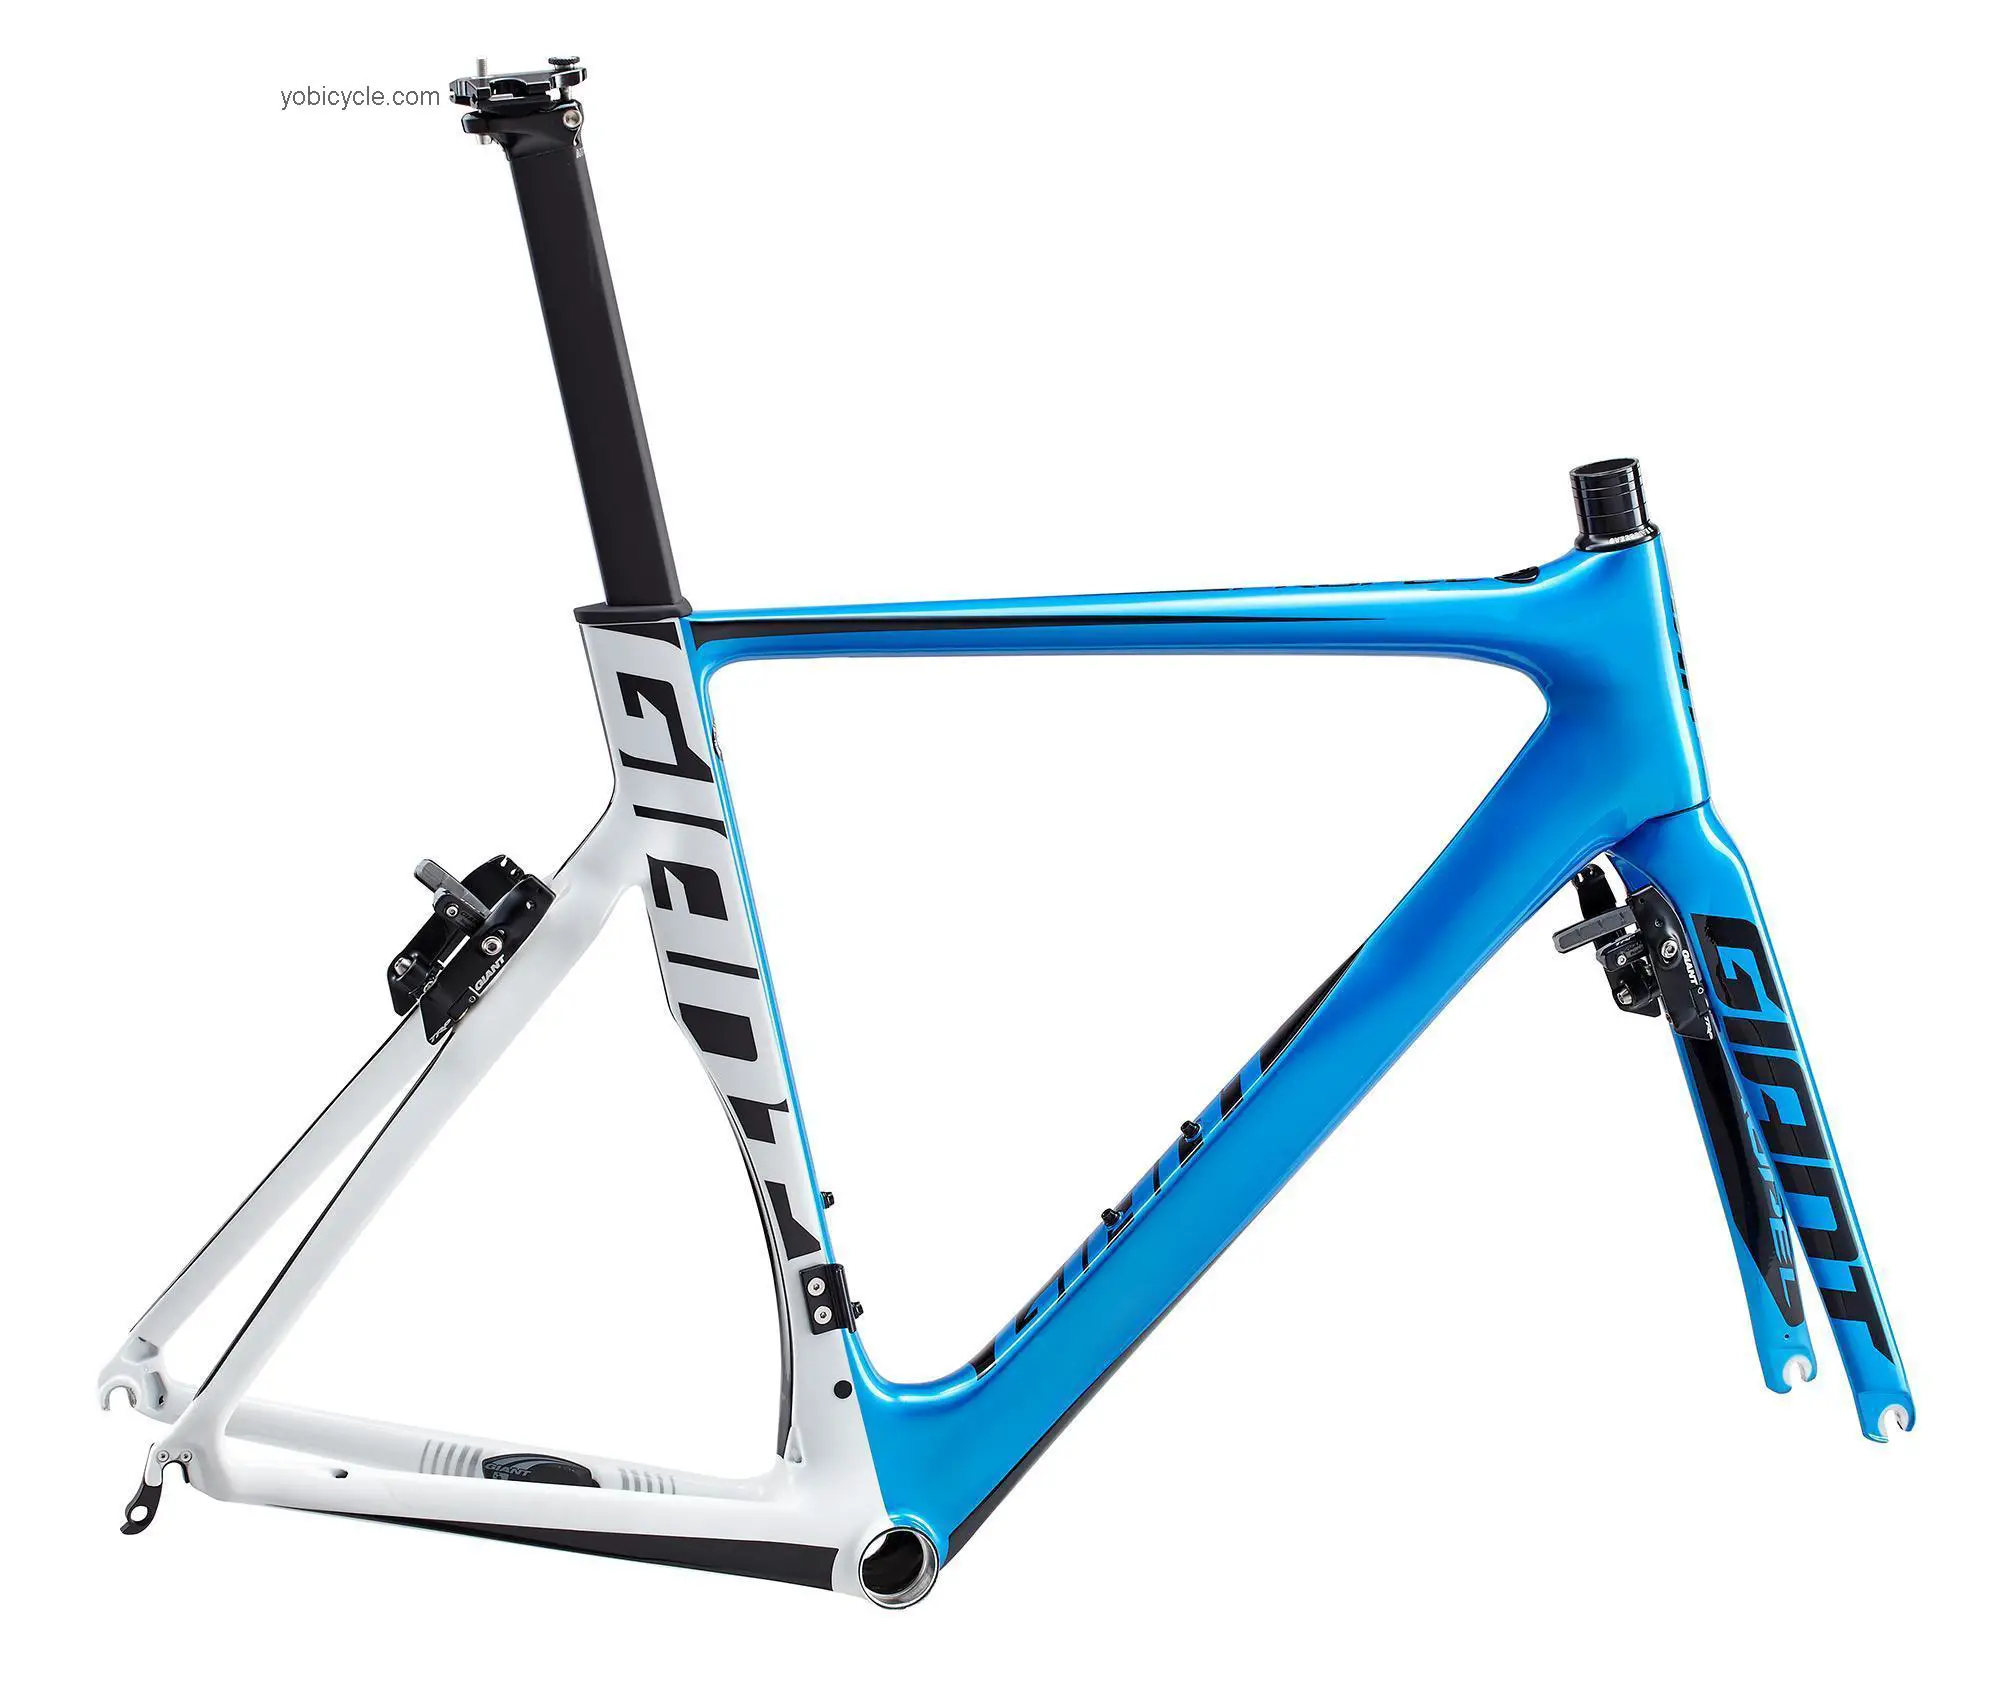 Giant  Propel Advanced Pro Frameset Technical data and specifications